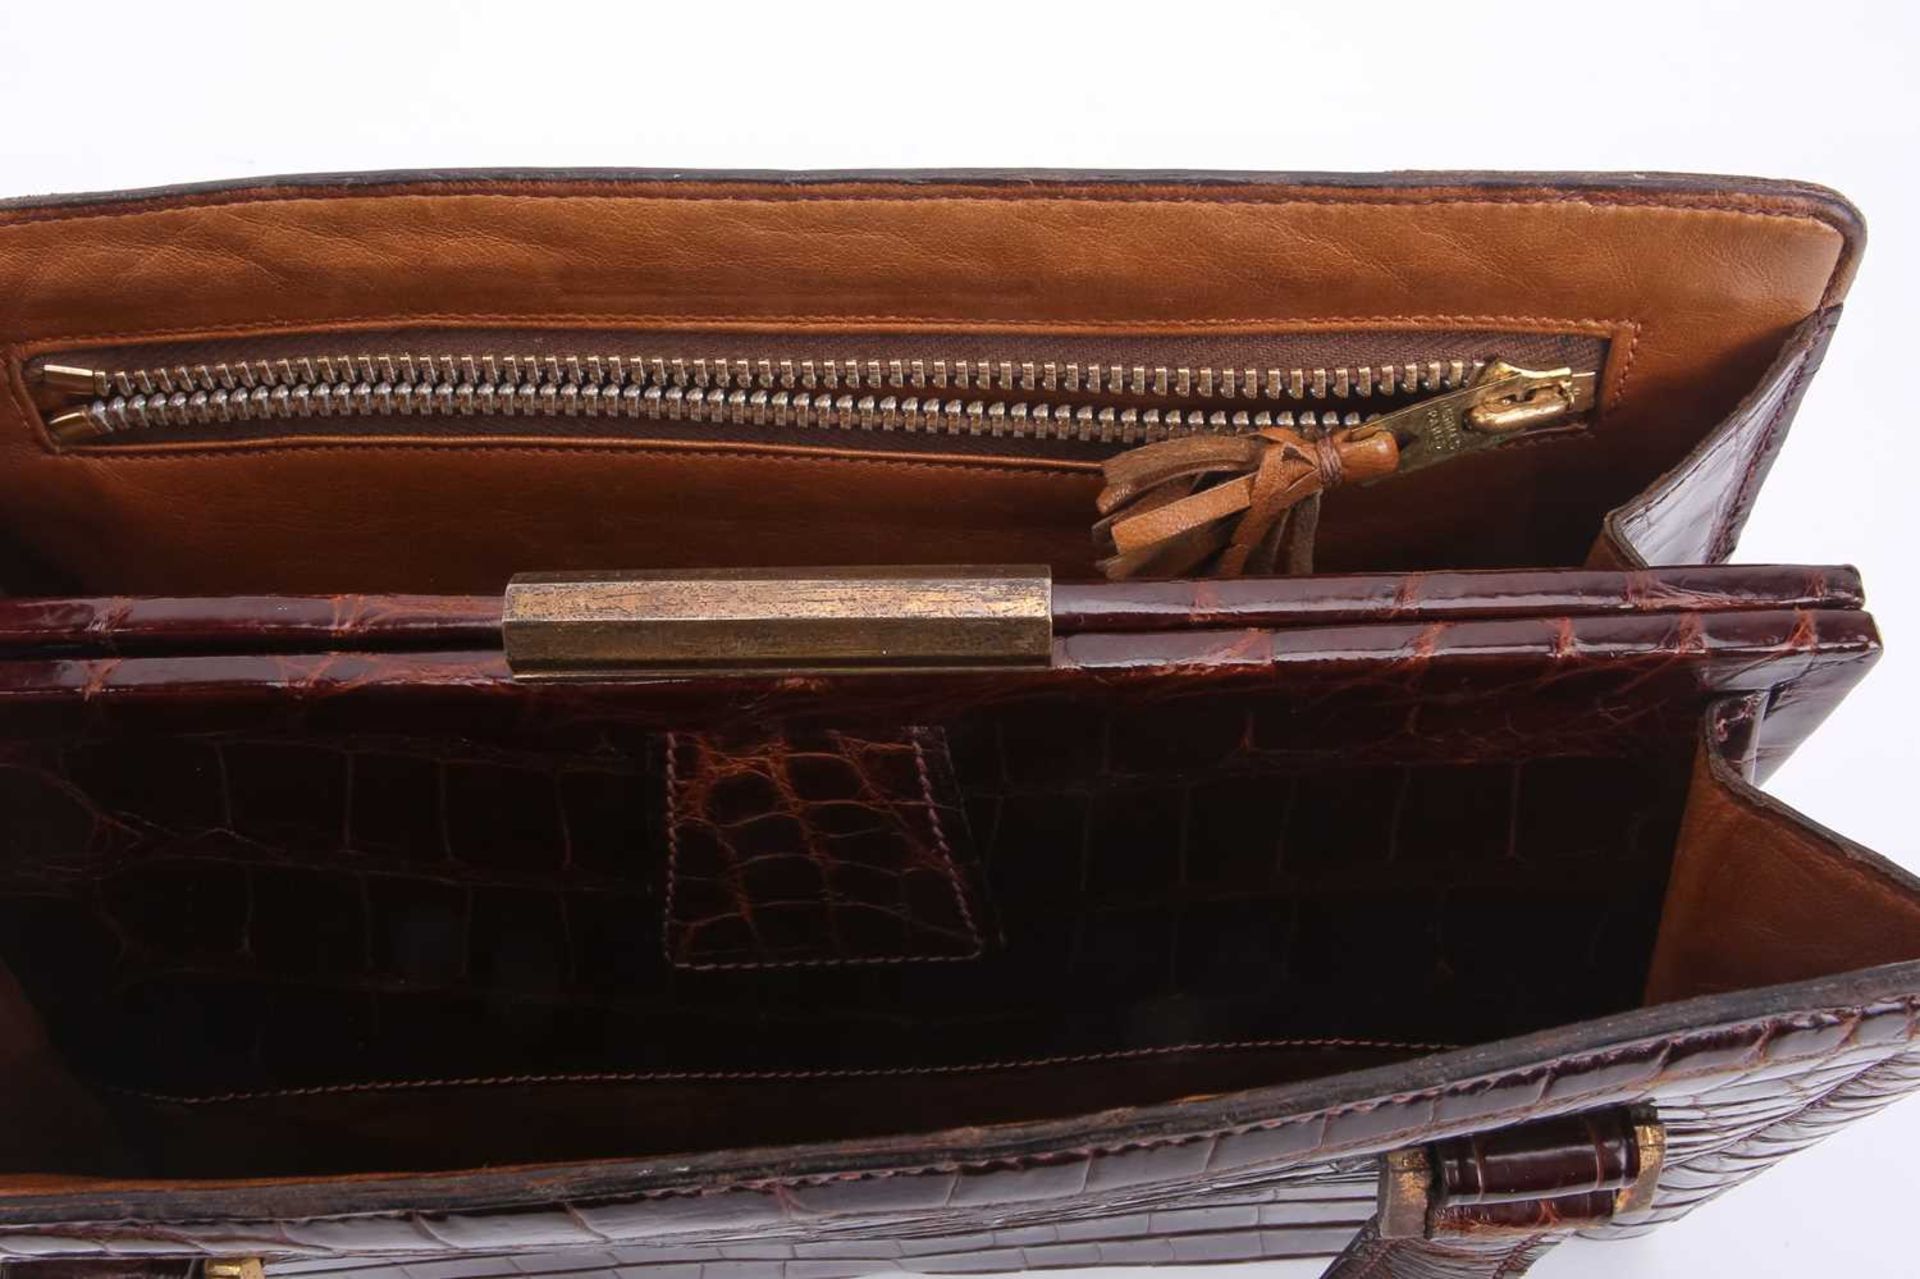 Hermès - a 'Pullman' handbag in brown crocodile skin, circa late 1930, a leather-lined structured - Image 8 of 12